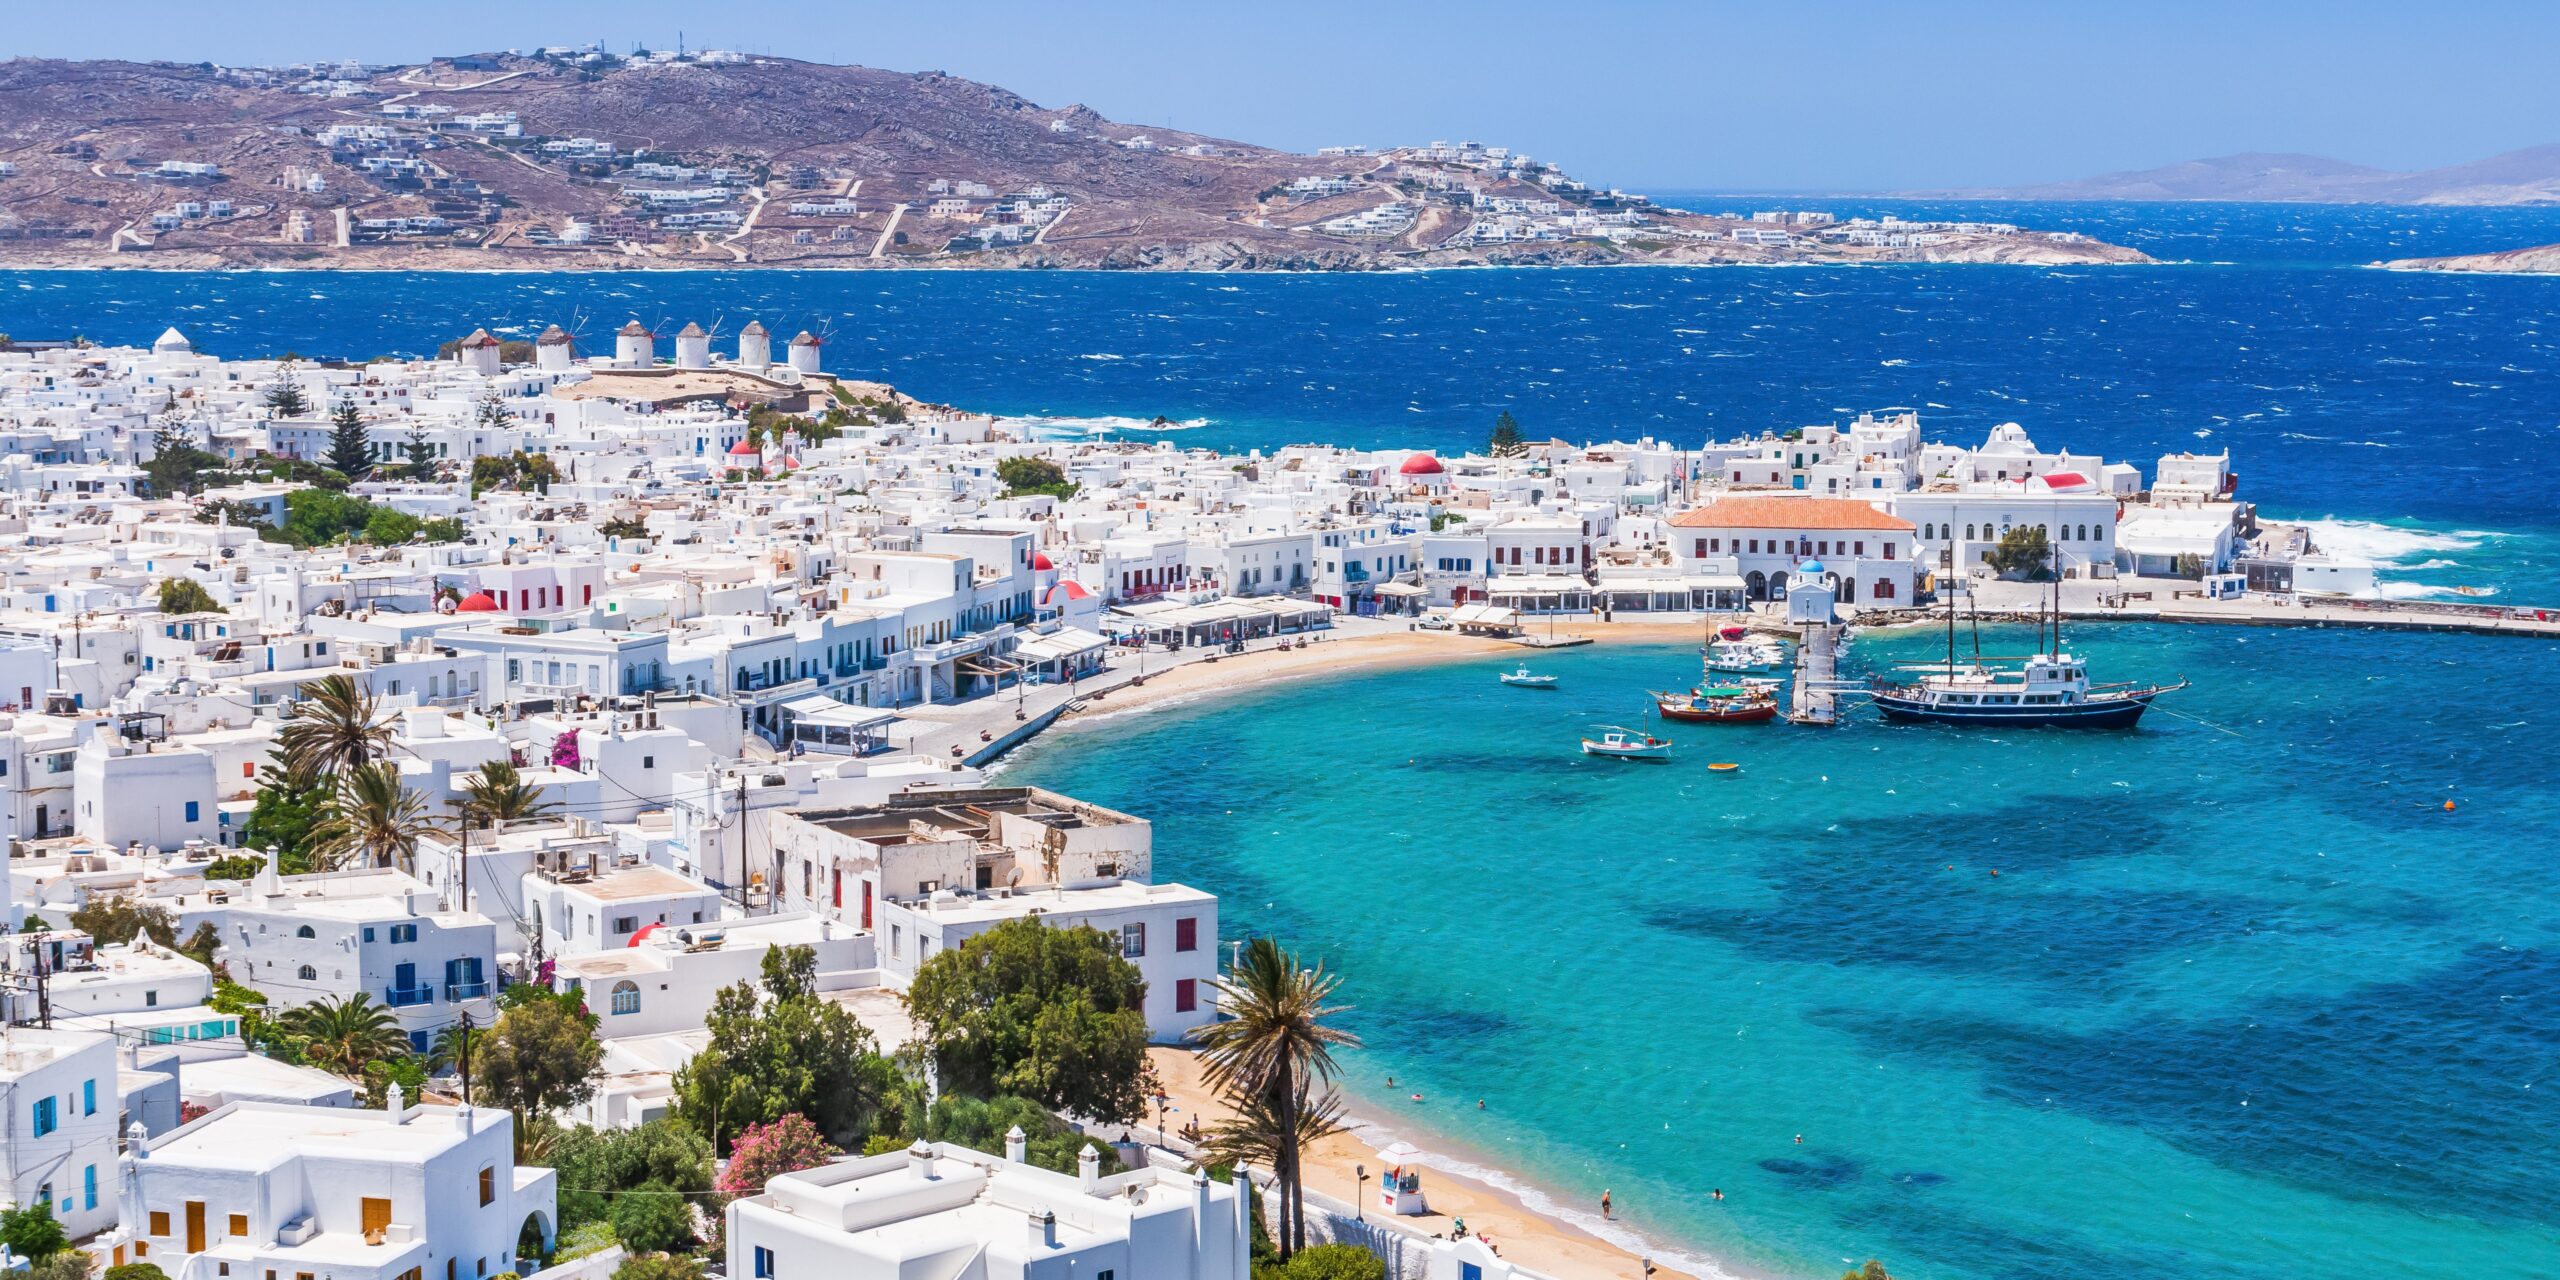 Overlooking the vibrant Mykonos town, with its white buildings clustered around a turquoise bay, where boats gently bob in the breeze.